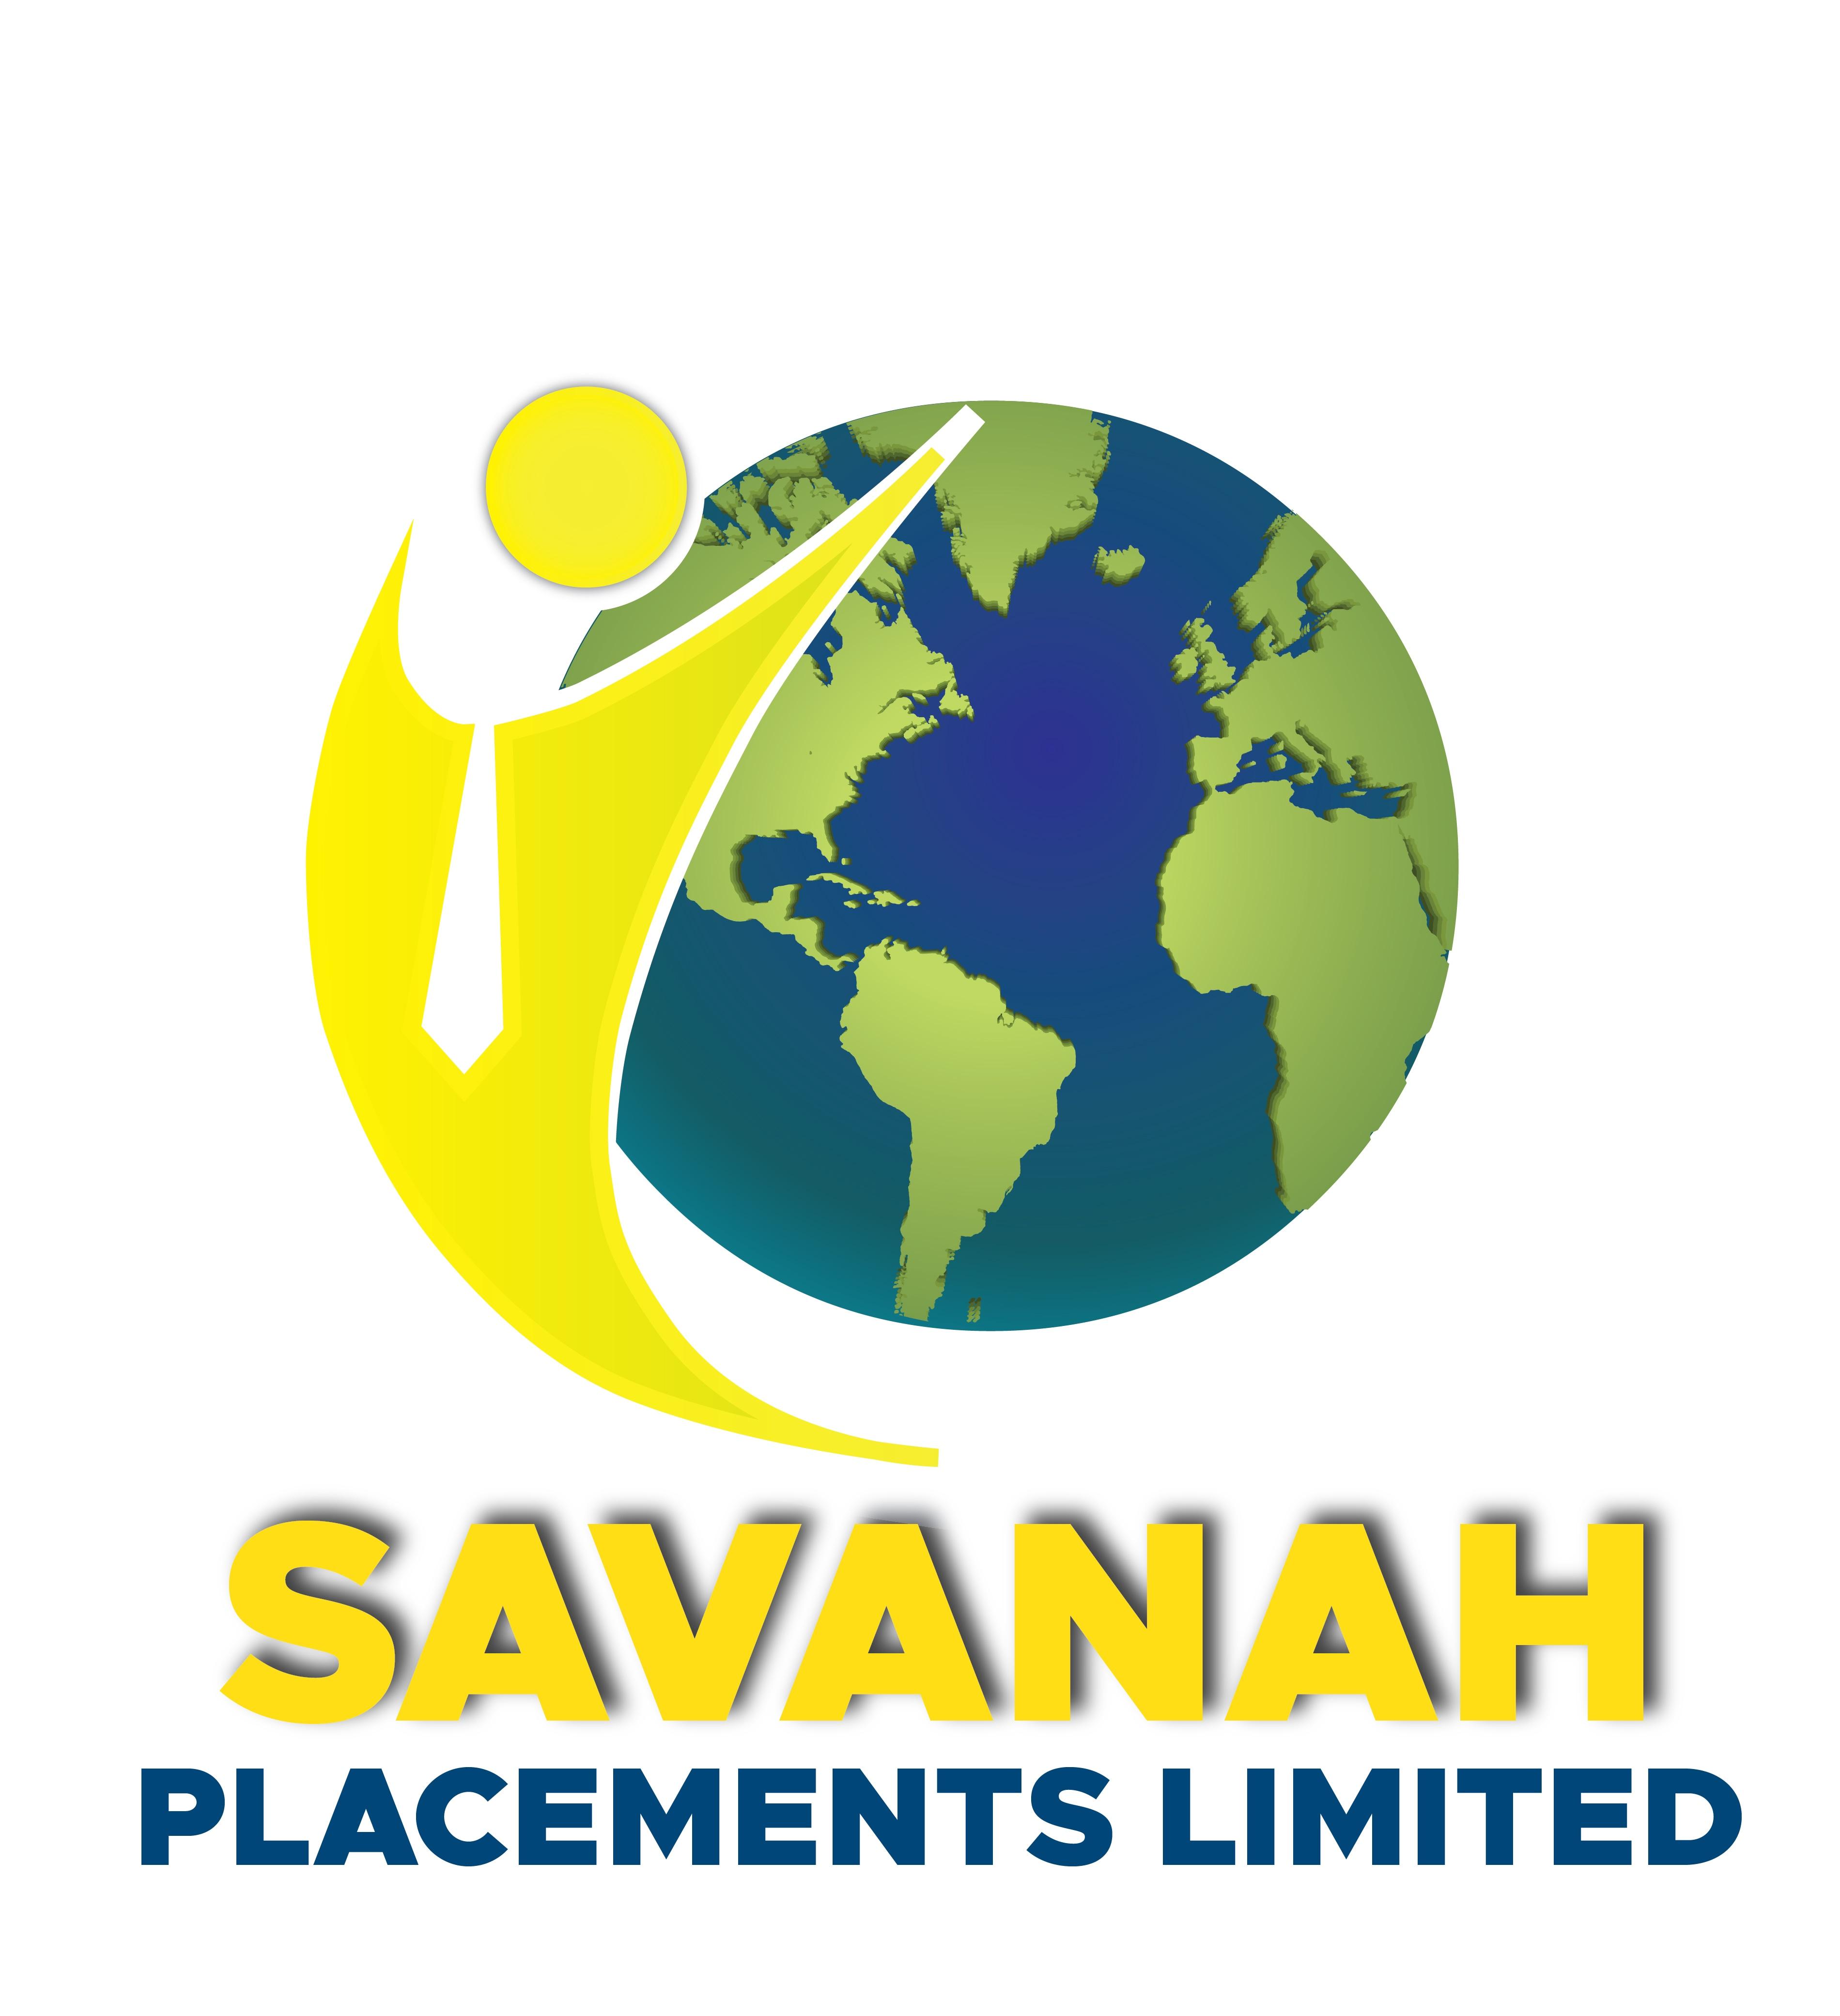 SAVANAH PLACEMENTS LIMITED